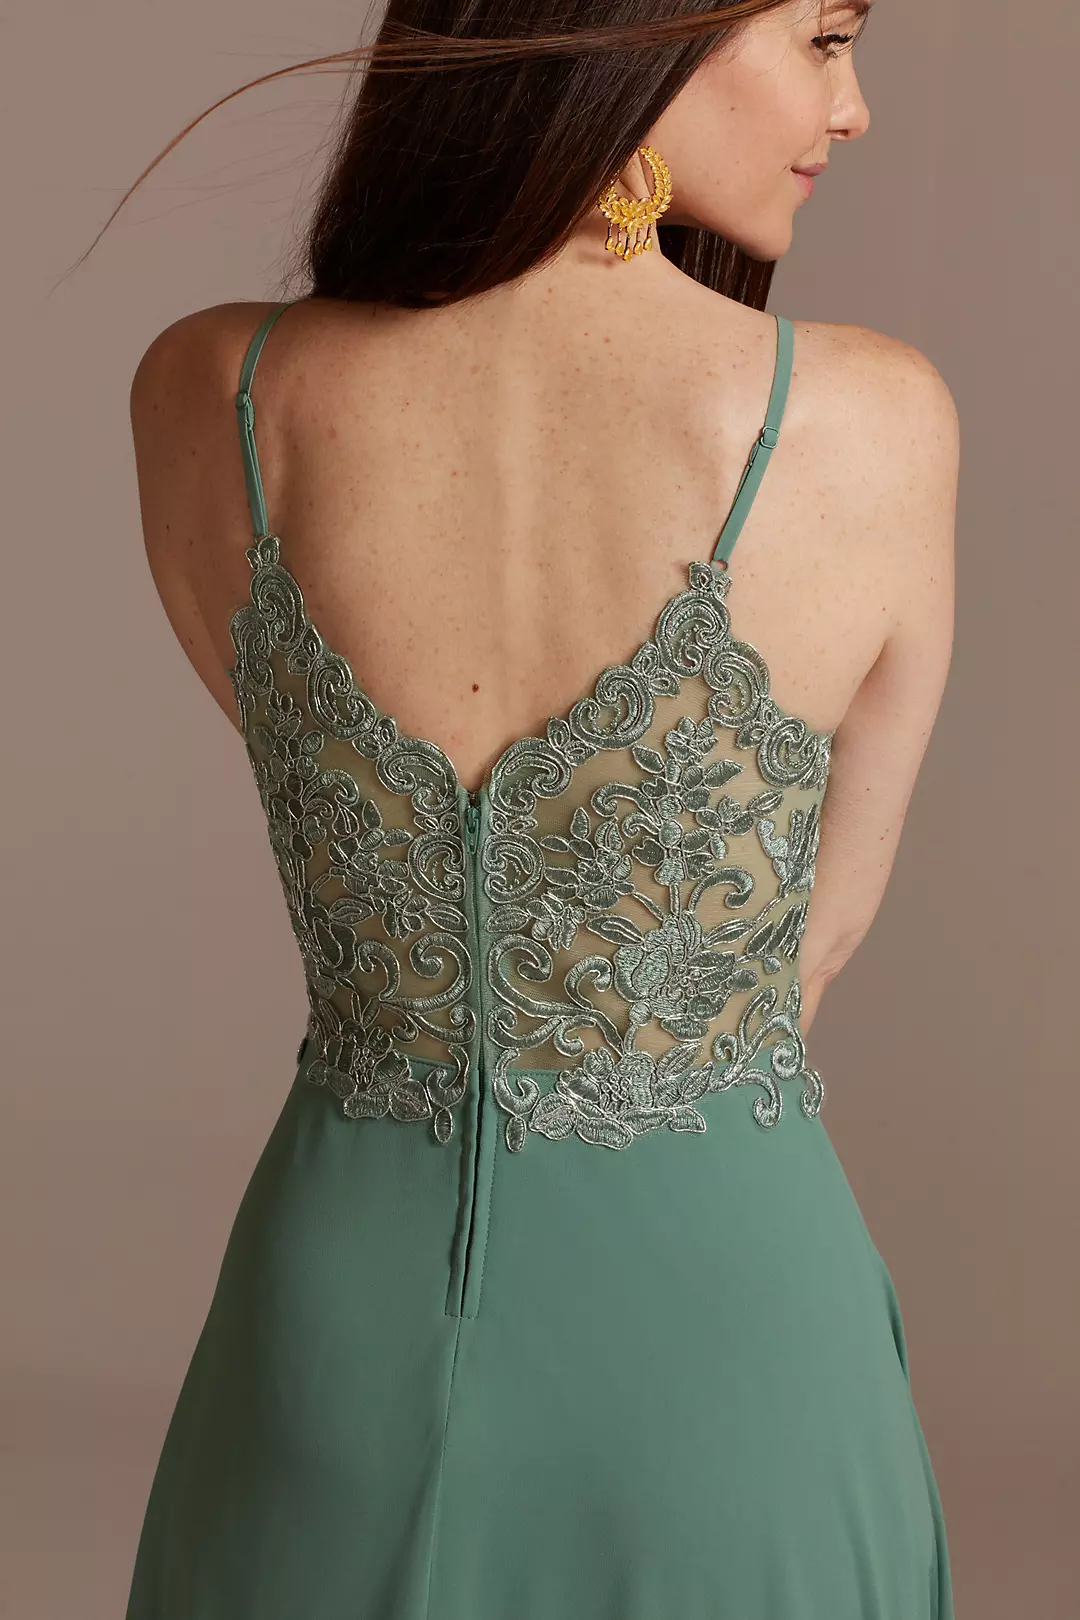 Corded Lace Back Dress with Chiffon Overlay Image 3